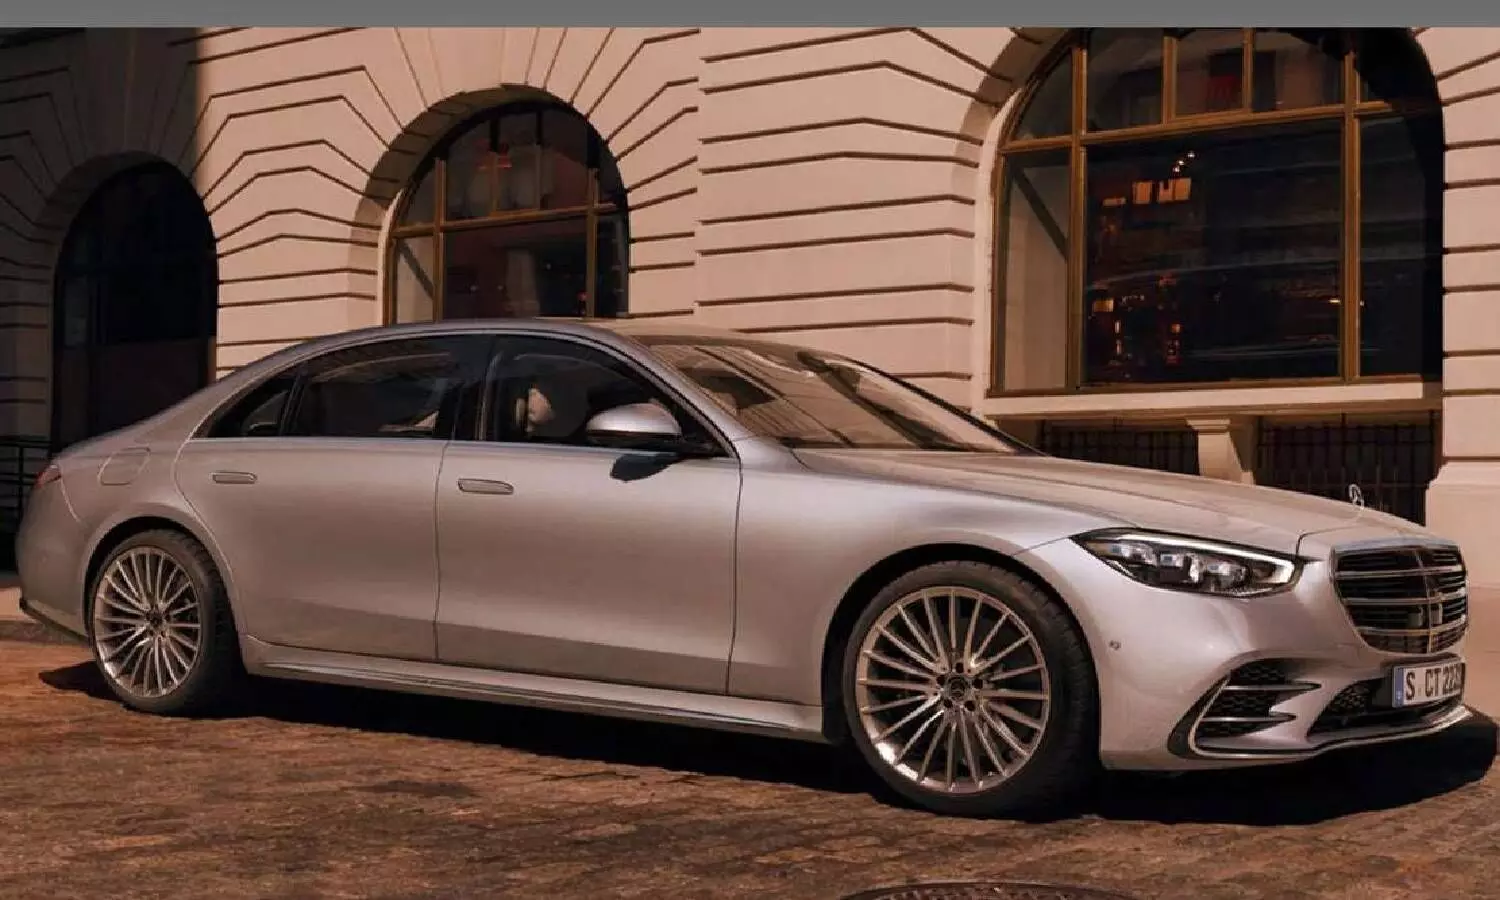 The Mercedes-Benz S-Class made-in-India is here